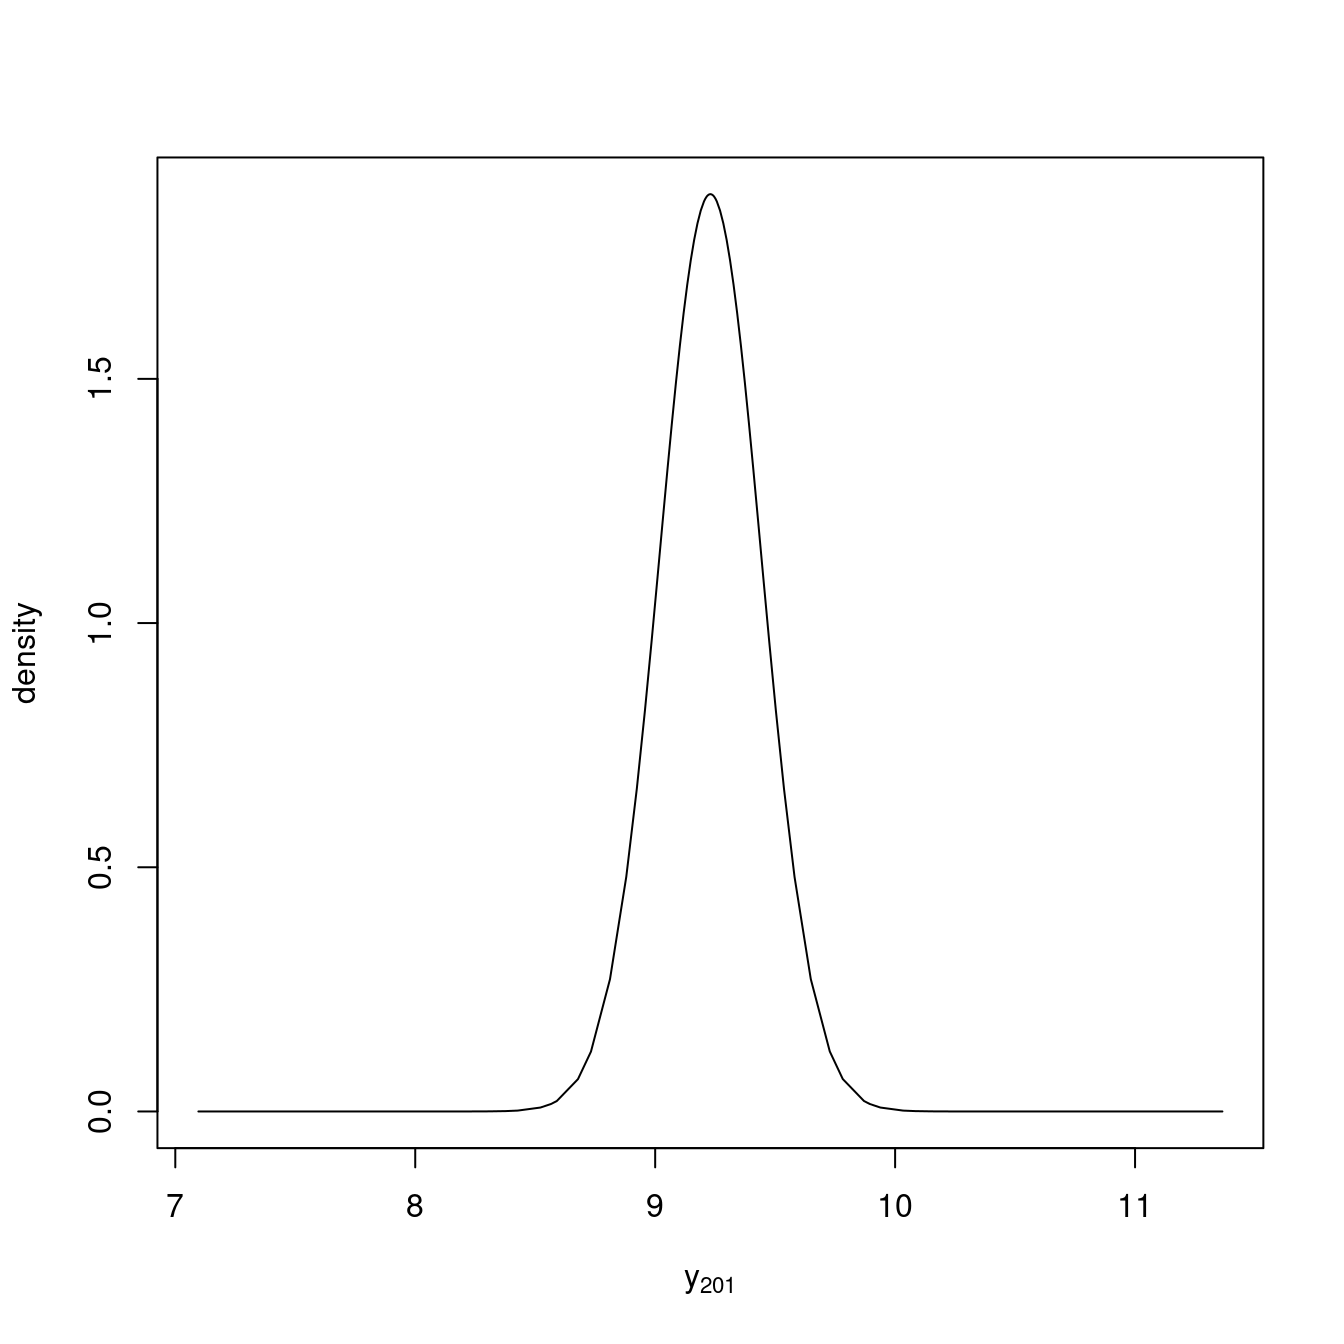 Predictive distribution of the response at location (0.5, 0.5).